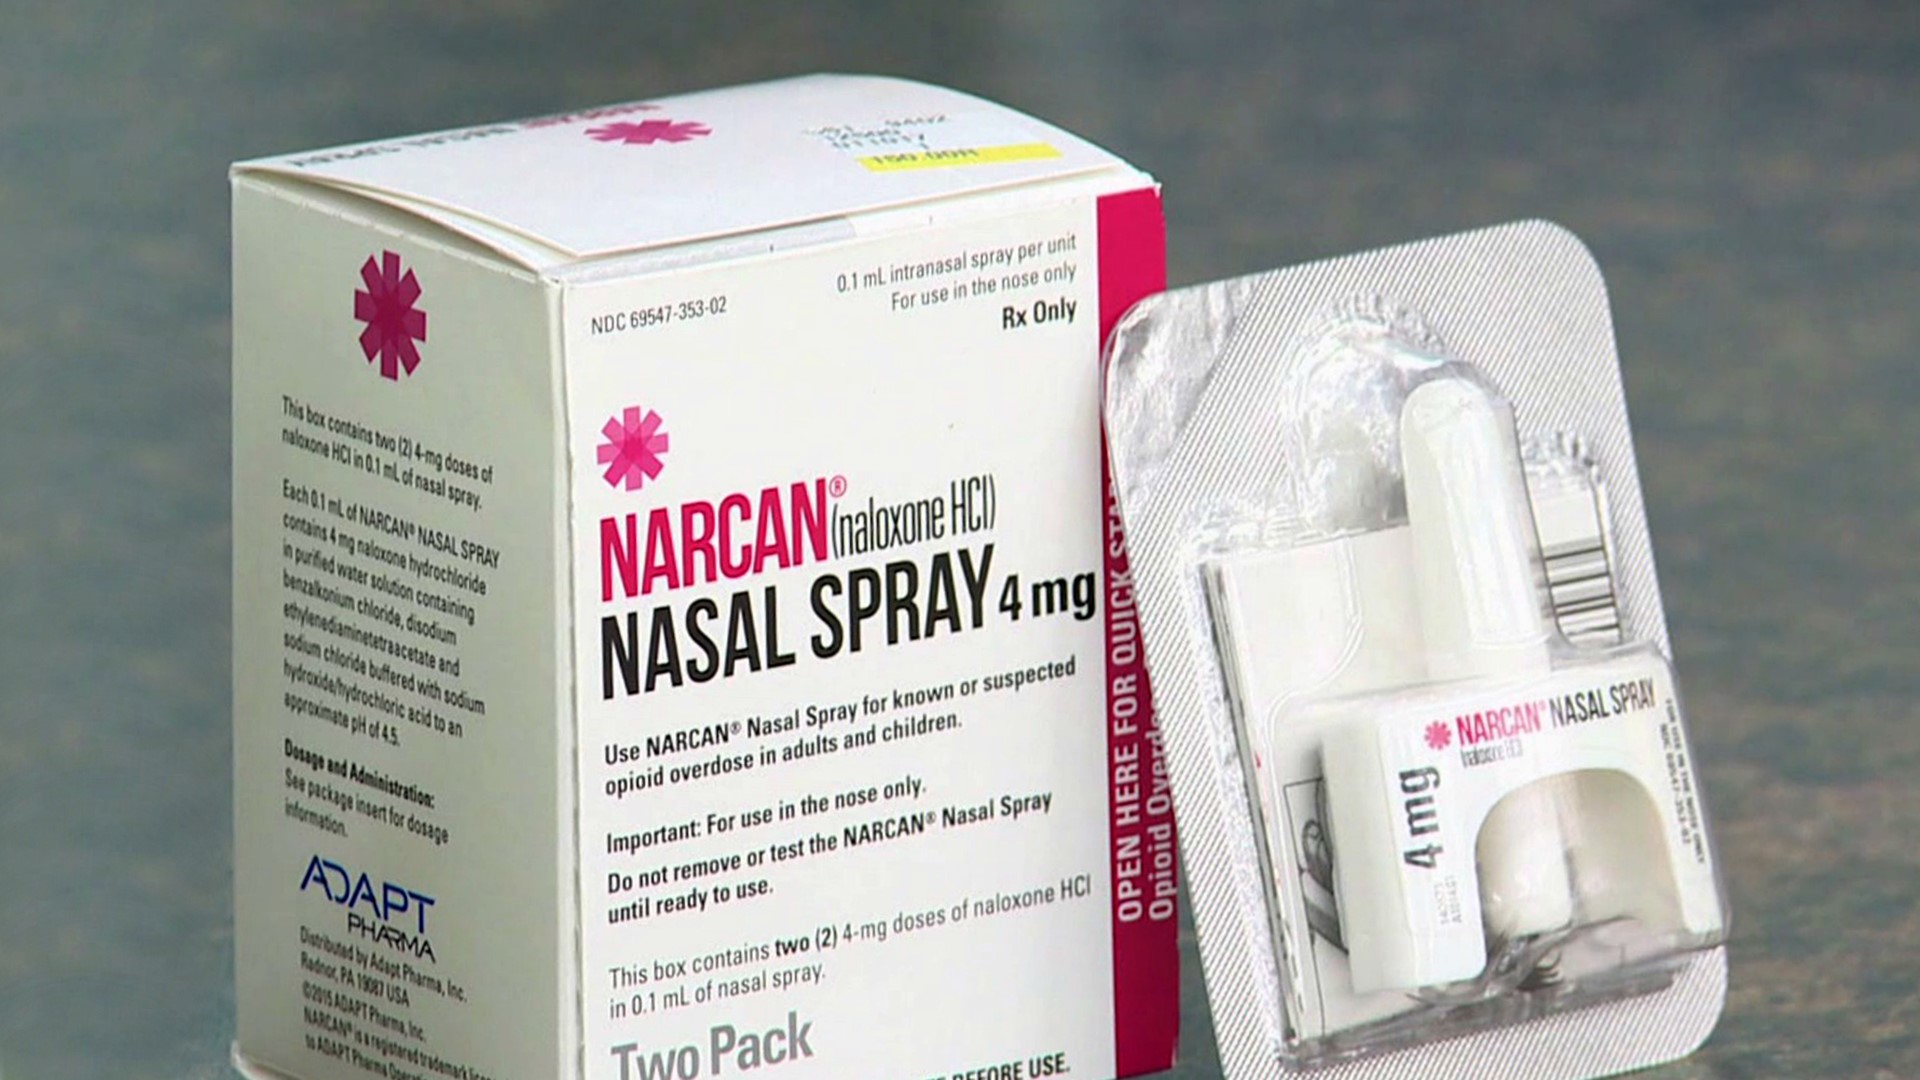 Naloxone is now available at seven airports in Pennsylvania, including the Wilkes-Barre/Scranton International Airport and Williamsport Regional.